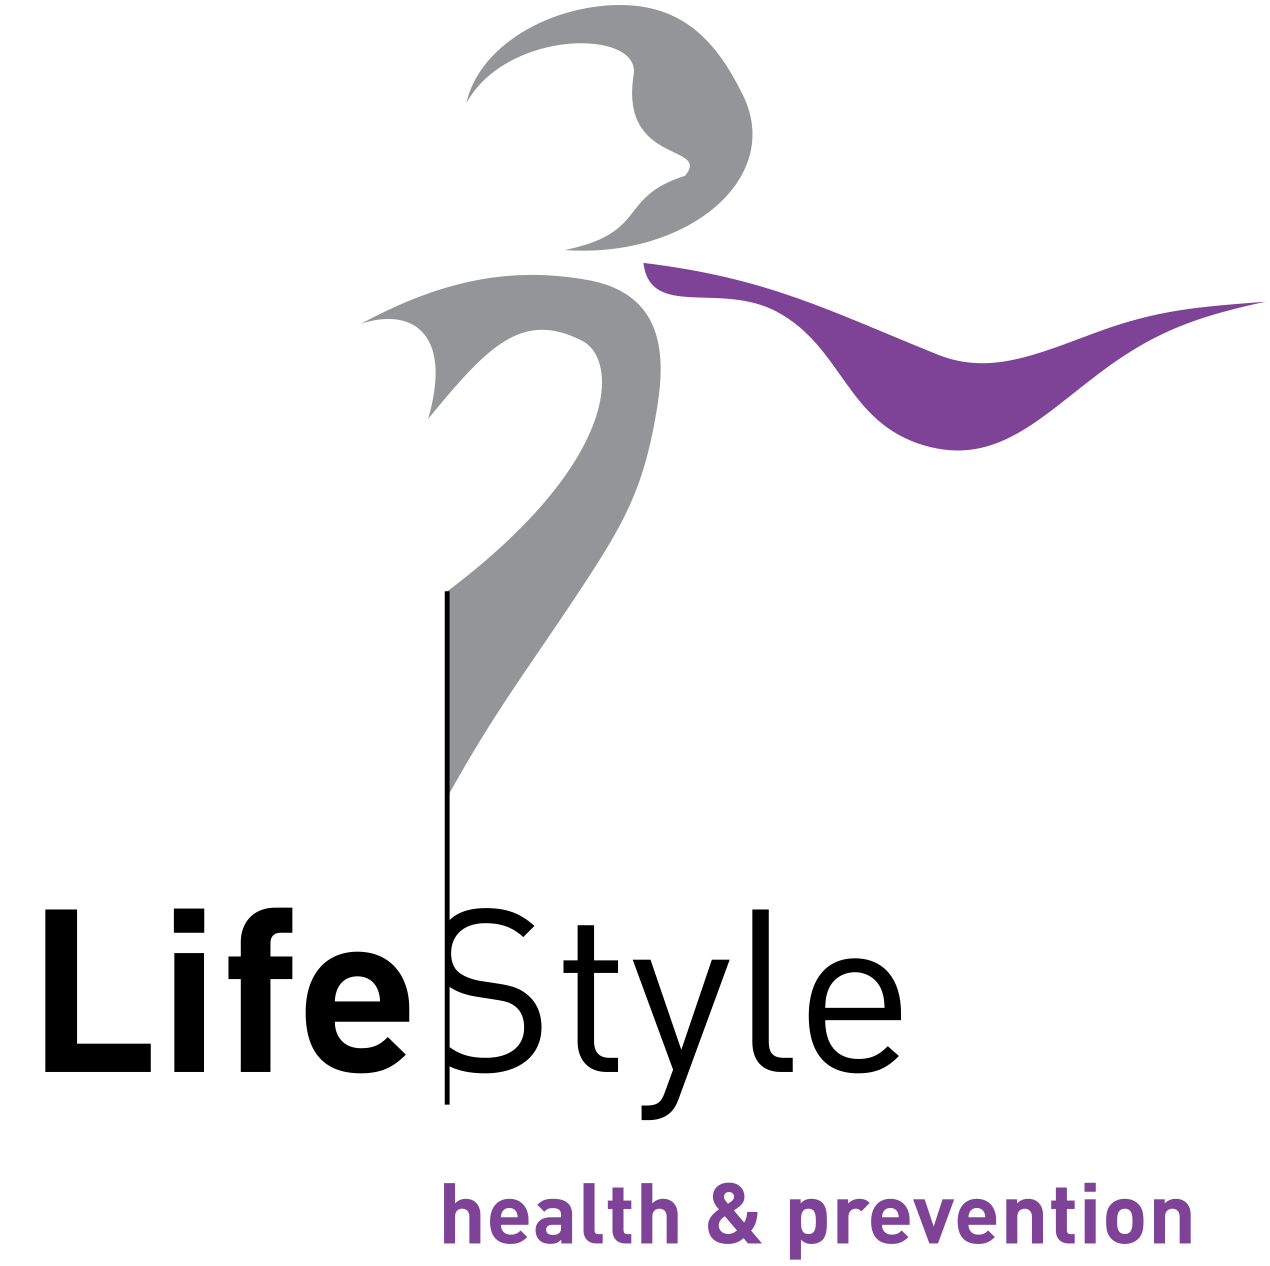 Life Style health & prevention